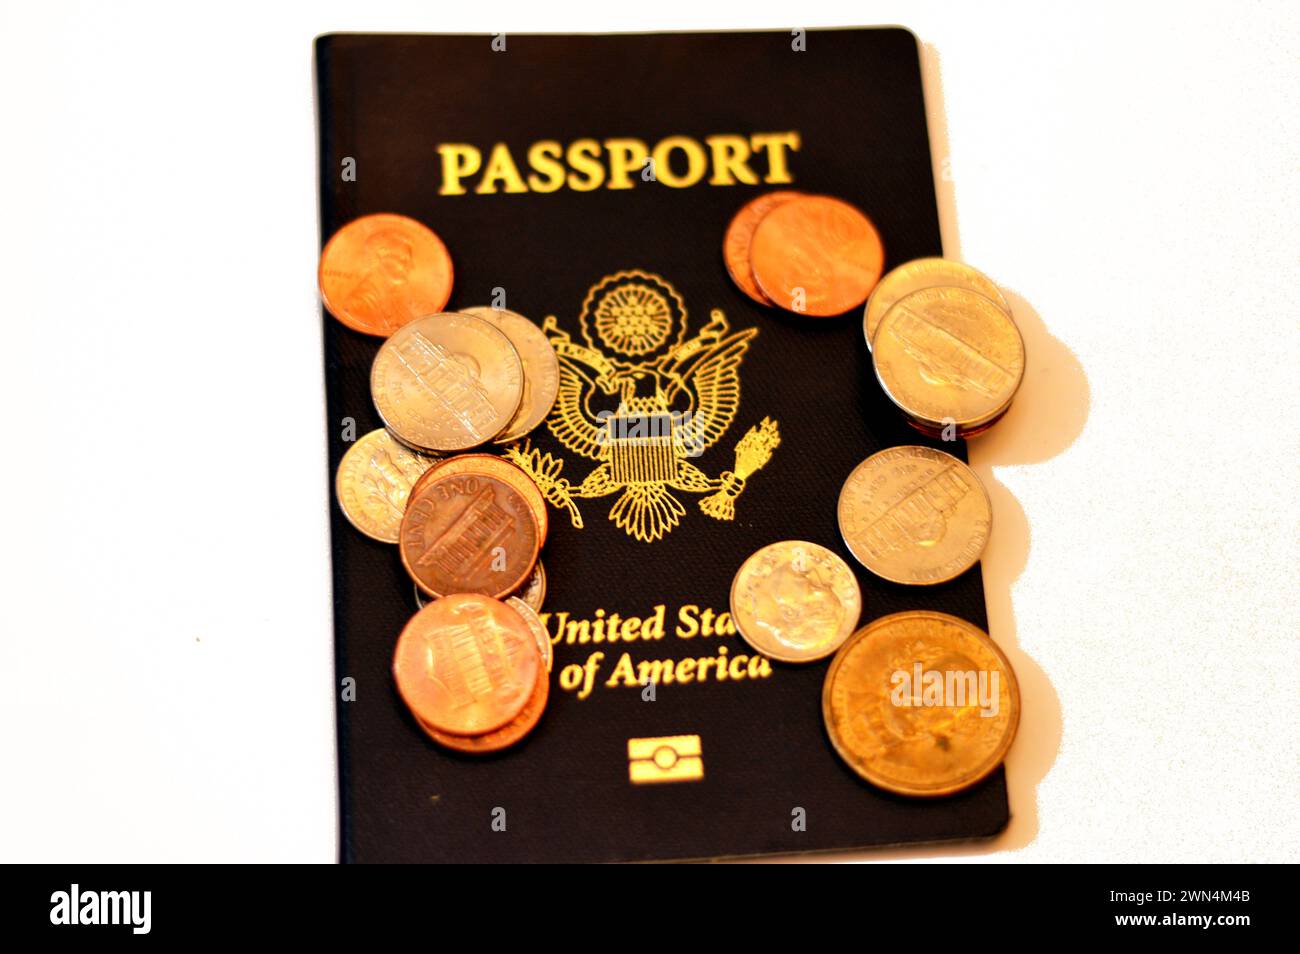 American coins change on the United States of American passport, passports are issued to the American citizens and nationals, Travel, tourism concept, Stock Photo